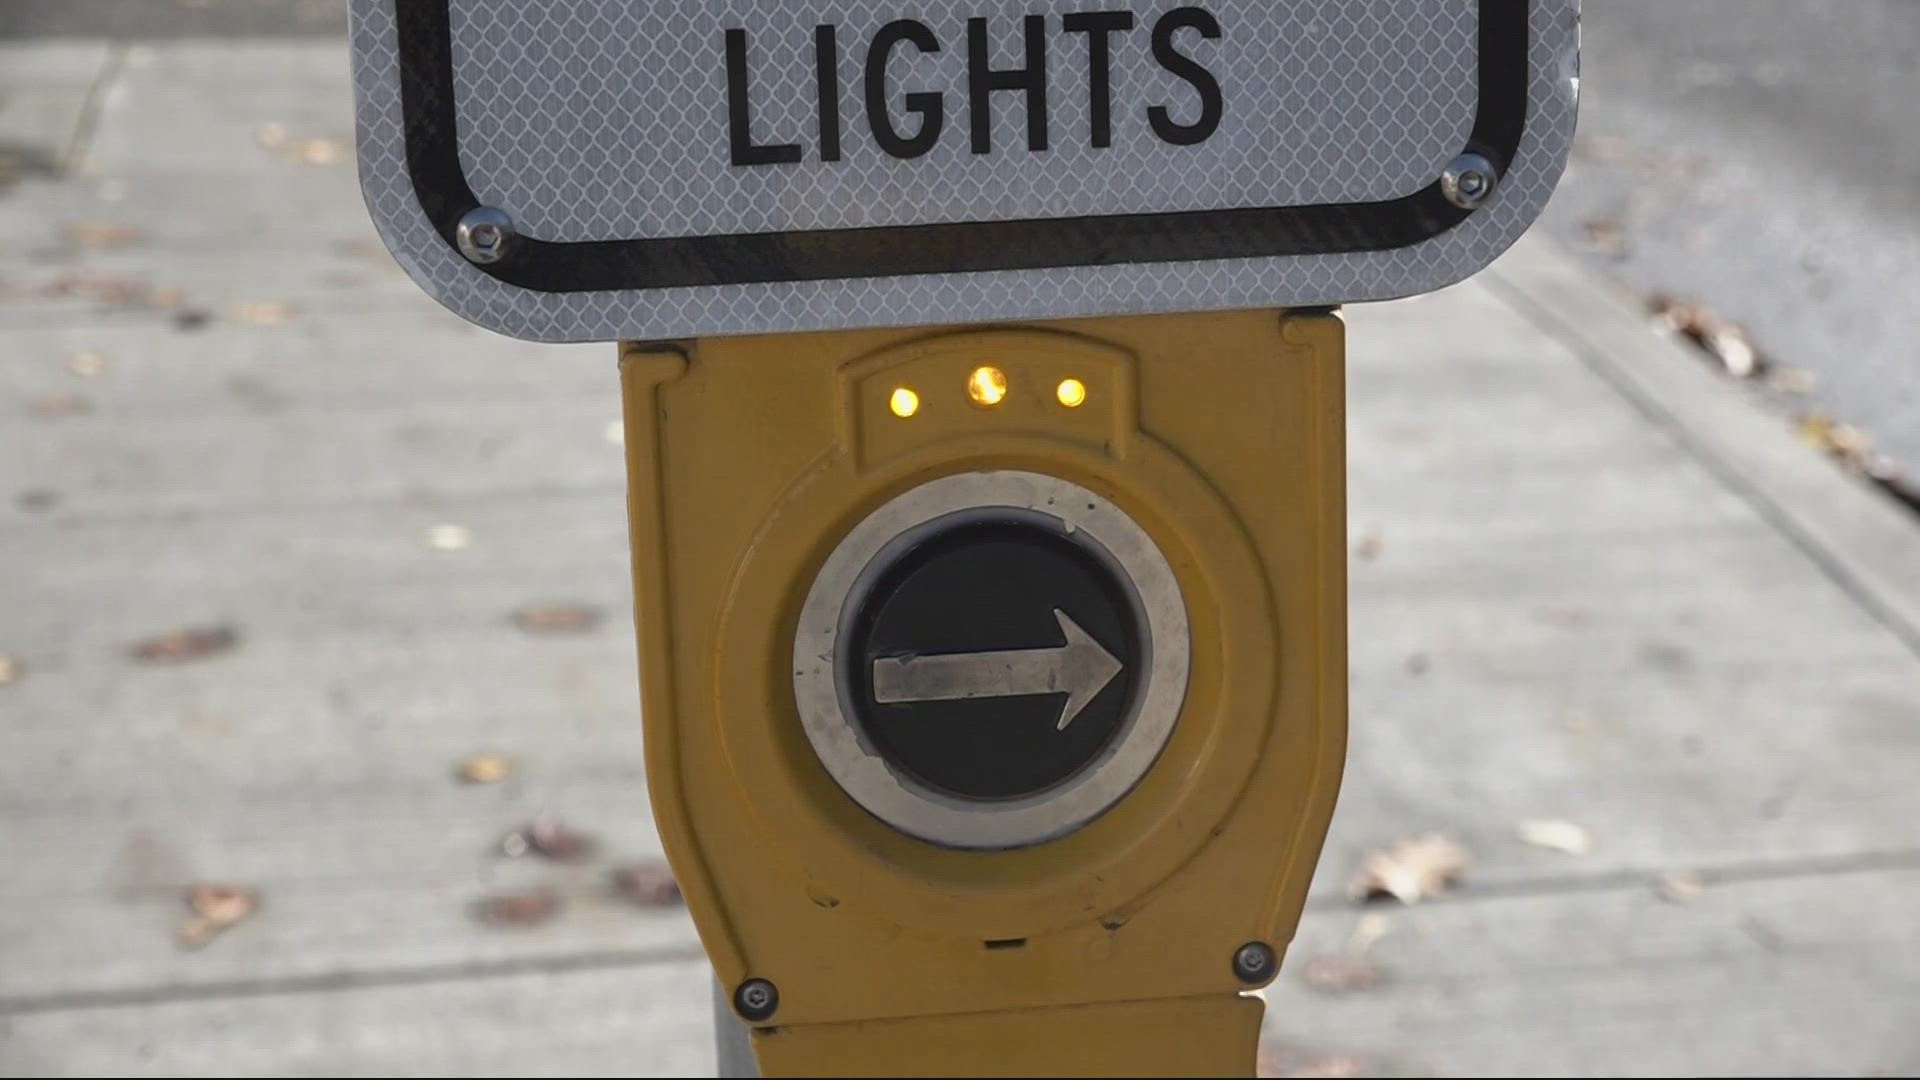 In the next year, ODOT plans to install 10 rapid flashing beacons along Southeast Powell Boulevard. It's a stretch prone to accidents involving pedestrians.